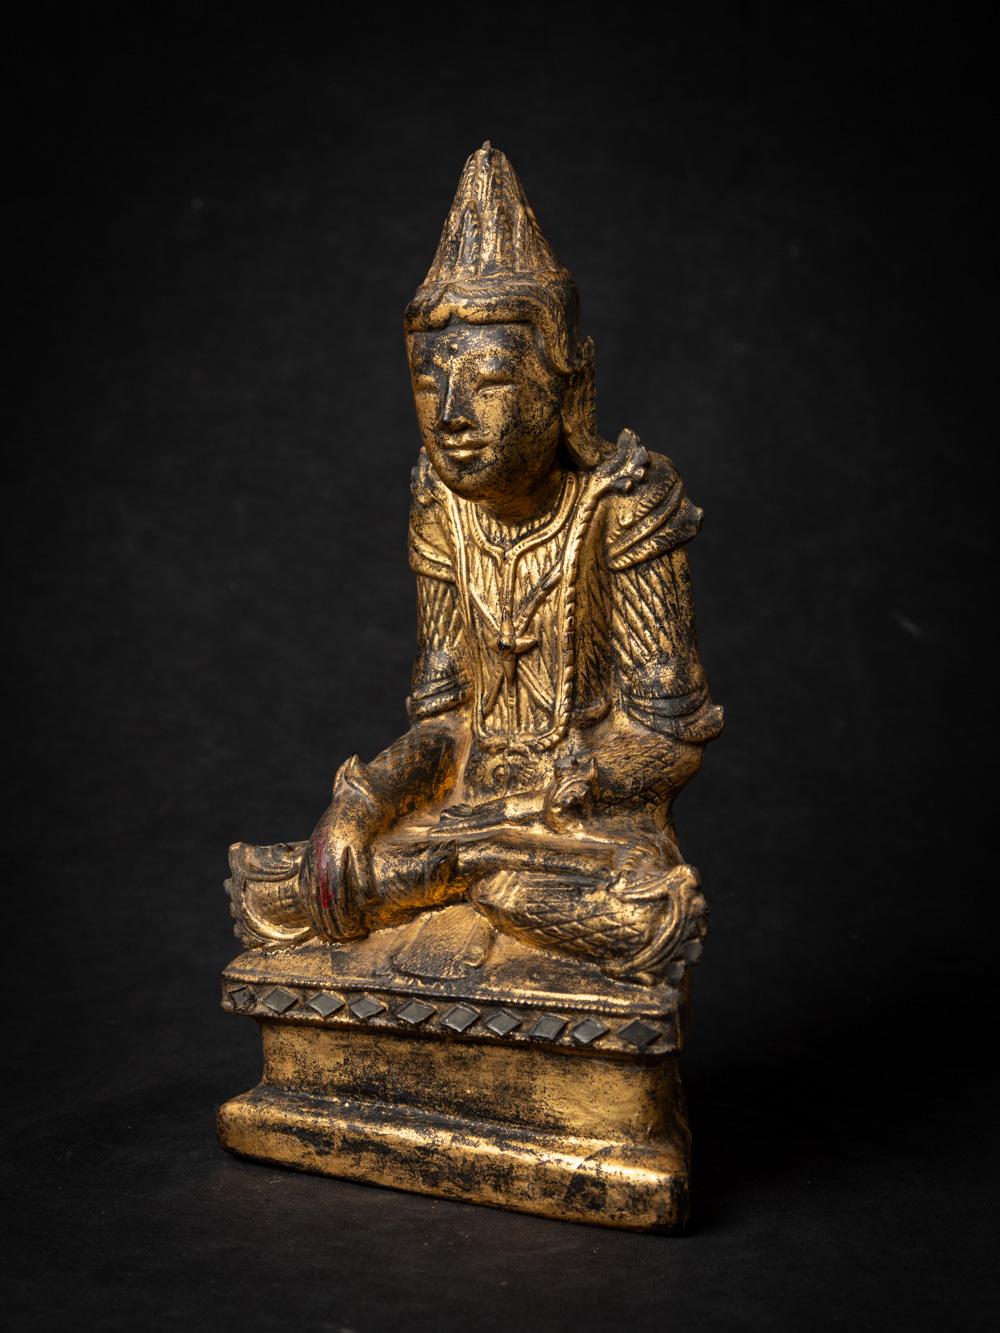 This antique wooden Burmese Shan Buddha statue is a remarkable piece of religious artistry and craftsmanship. Carved from wood, it stands at a height of 29 cm with dimensions of 15.5 cm in width and 8.7 cm in depth. 

The statue belongs to the Shan